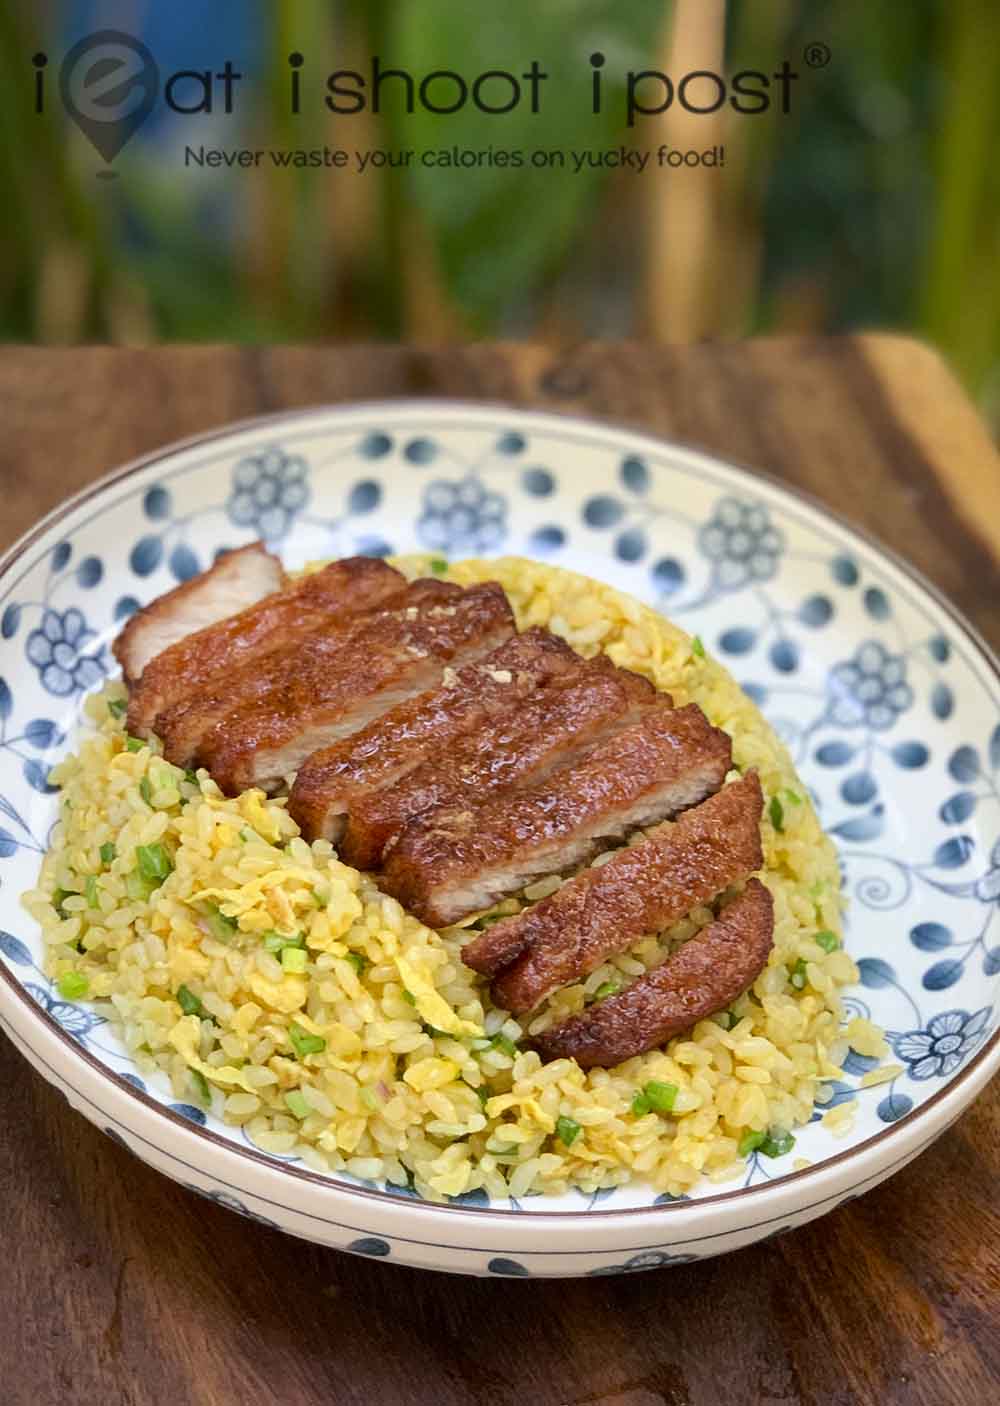 Din Tai Fung Style Pork chop and Egg Fried Rice recipe - ieatishootipost